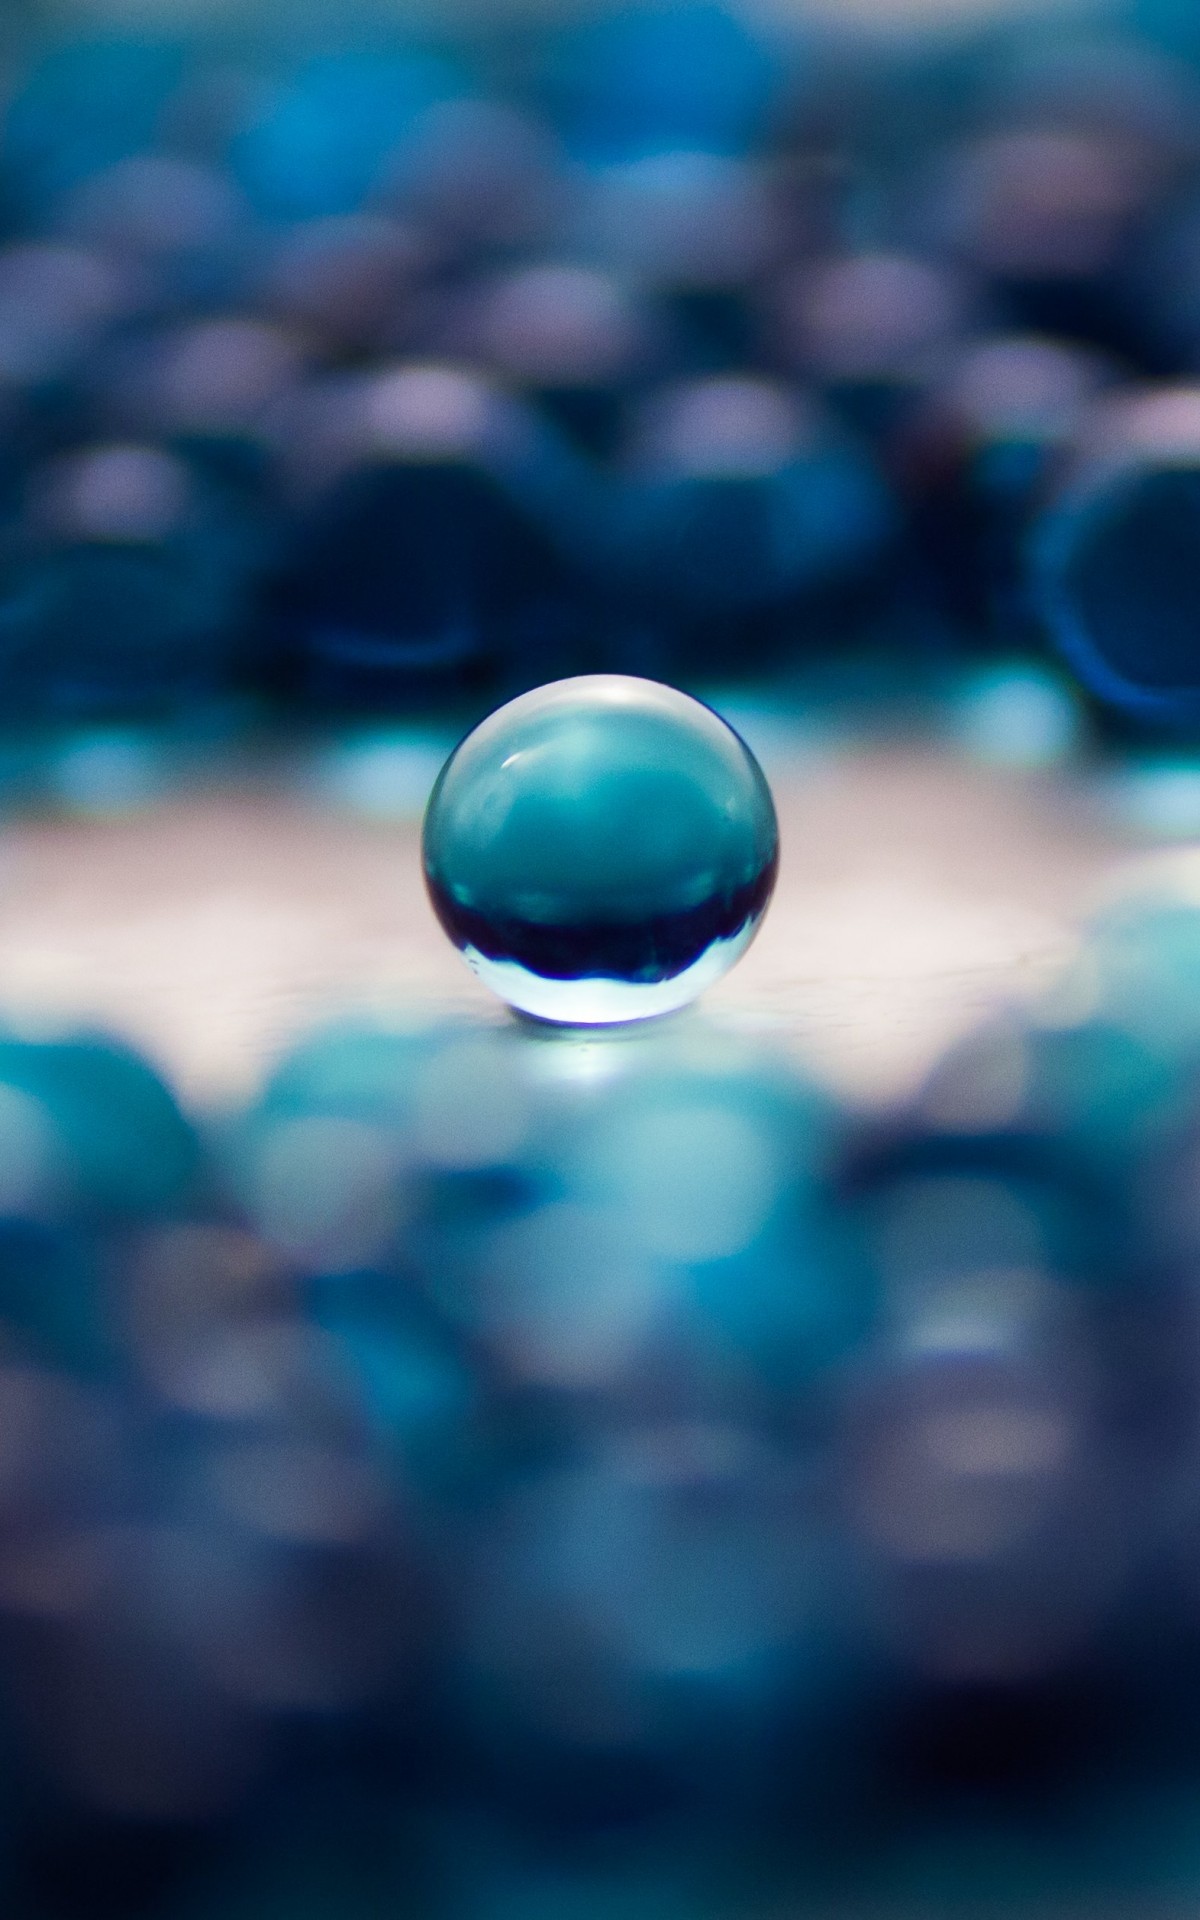 Water Balls Wallpaper for Amazon Kindle Fire HDX